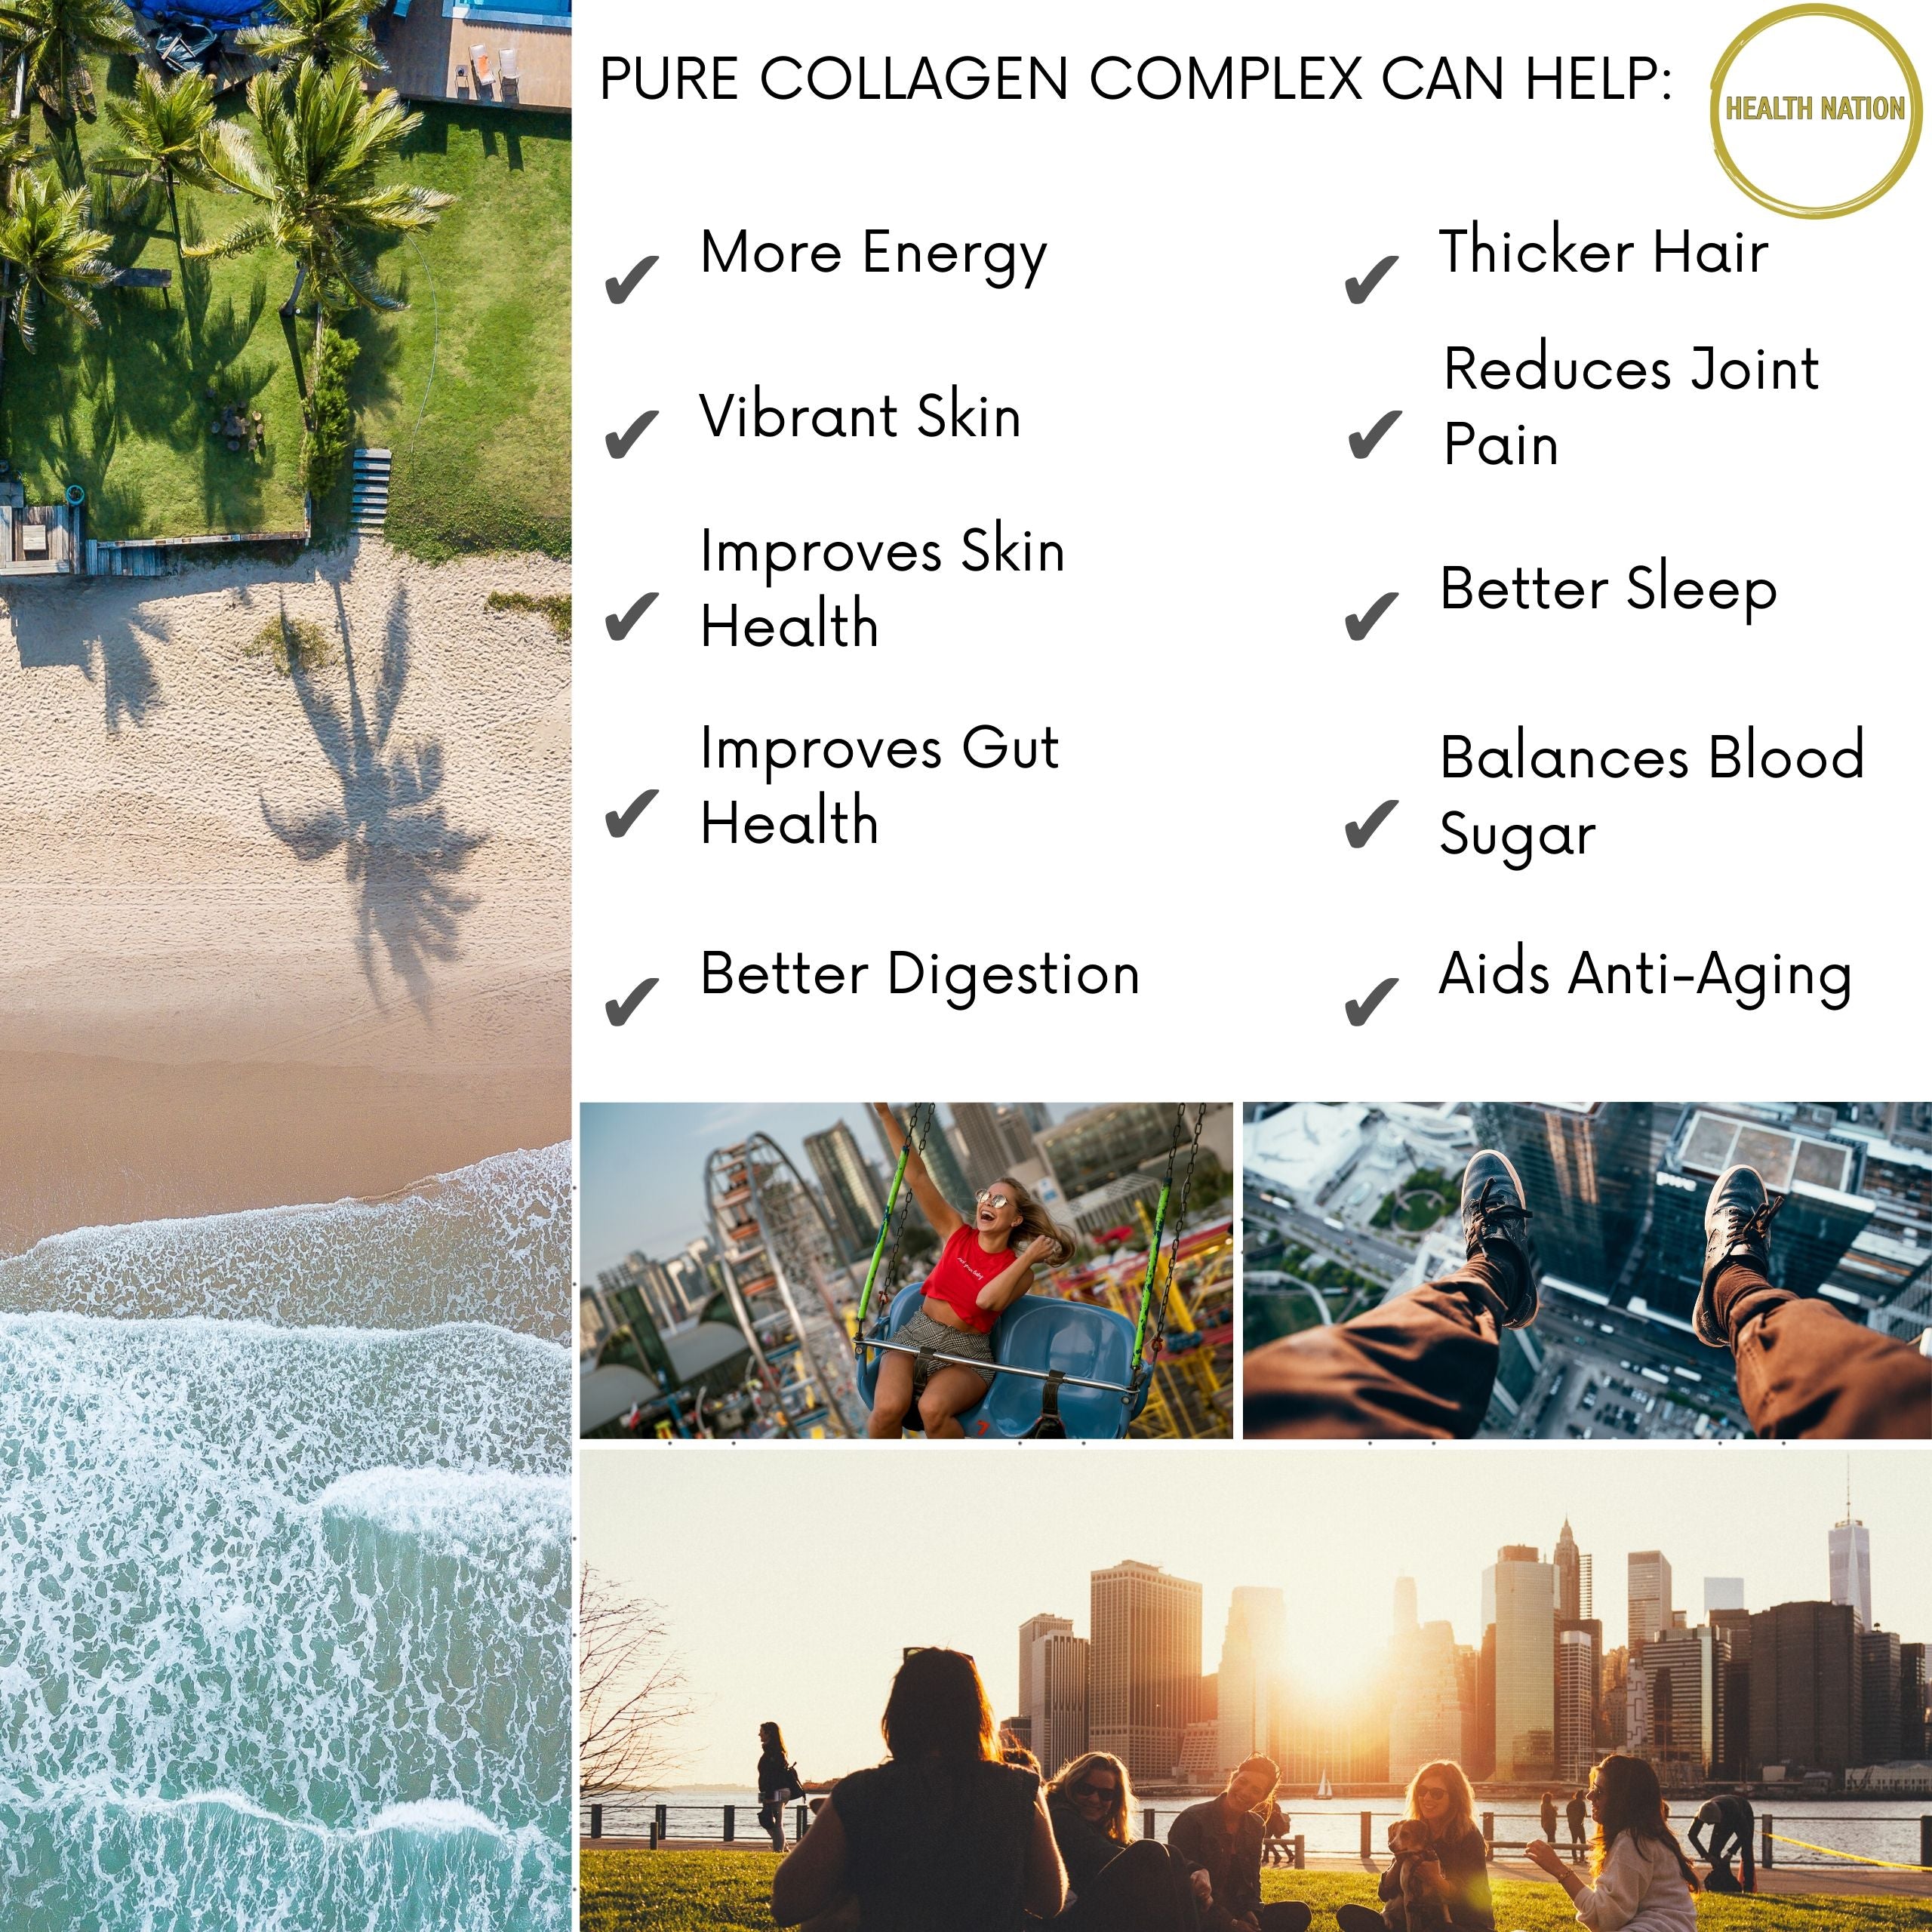 Pure Collagen Complex | Helps with Vibrant Skin, Hair, Sleep, Gut/Digestion, Joint Pain, Anti-Ageing and Balances Blood Sugar | Made in UK | 60 Capsules - Health Nation